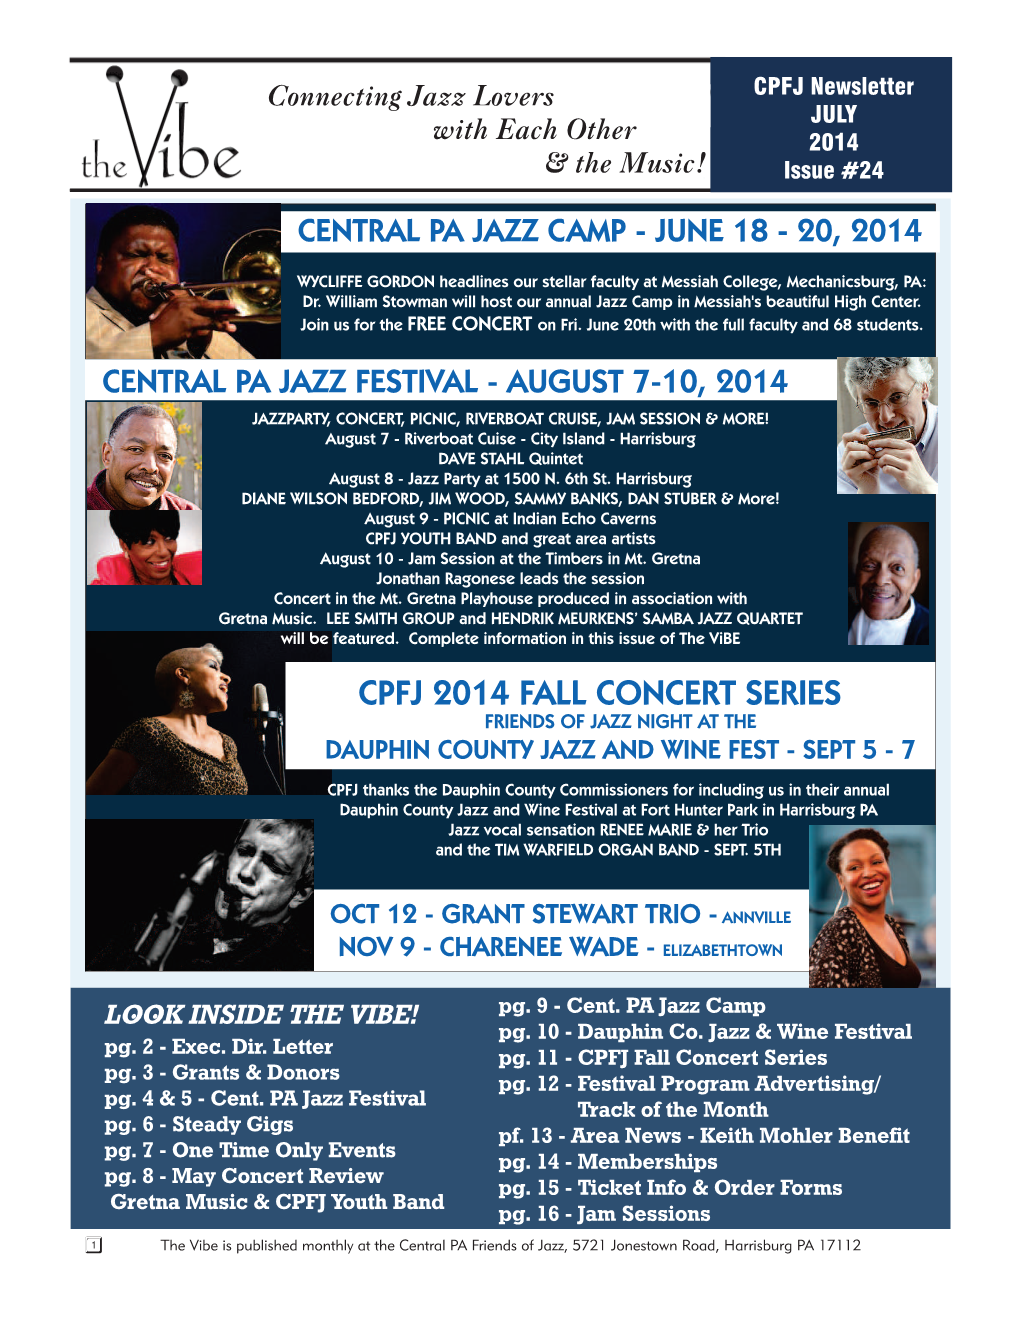 Cpfj 2014 Fall Concert Series Friends of Jazz Night at the Dauphin County Jazz and Wine Fest - Sept 5 - 7